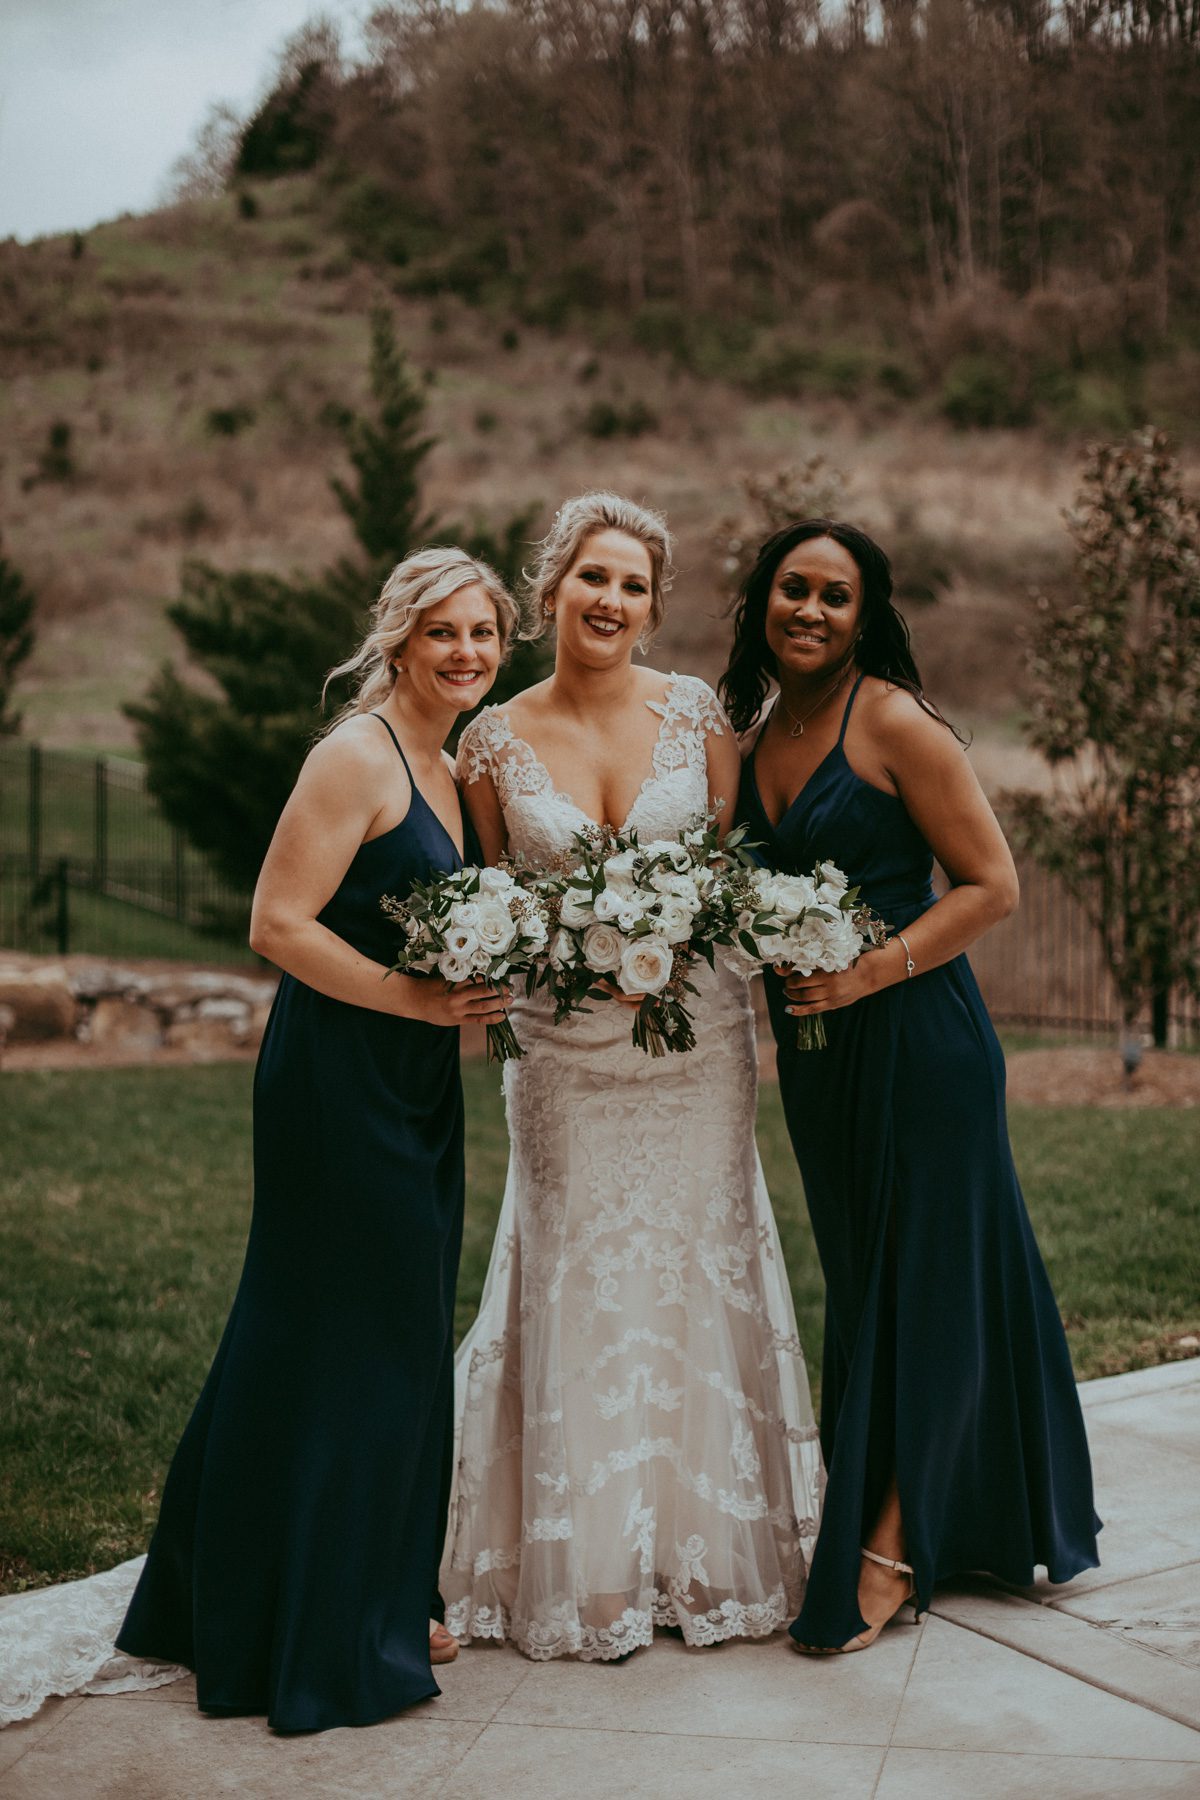 Bride and bridesmaids for small wedding 